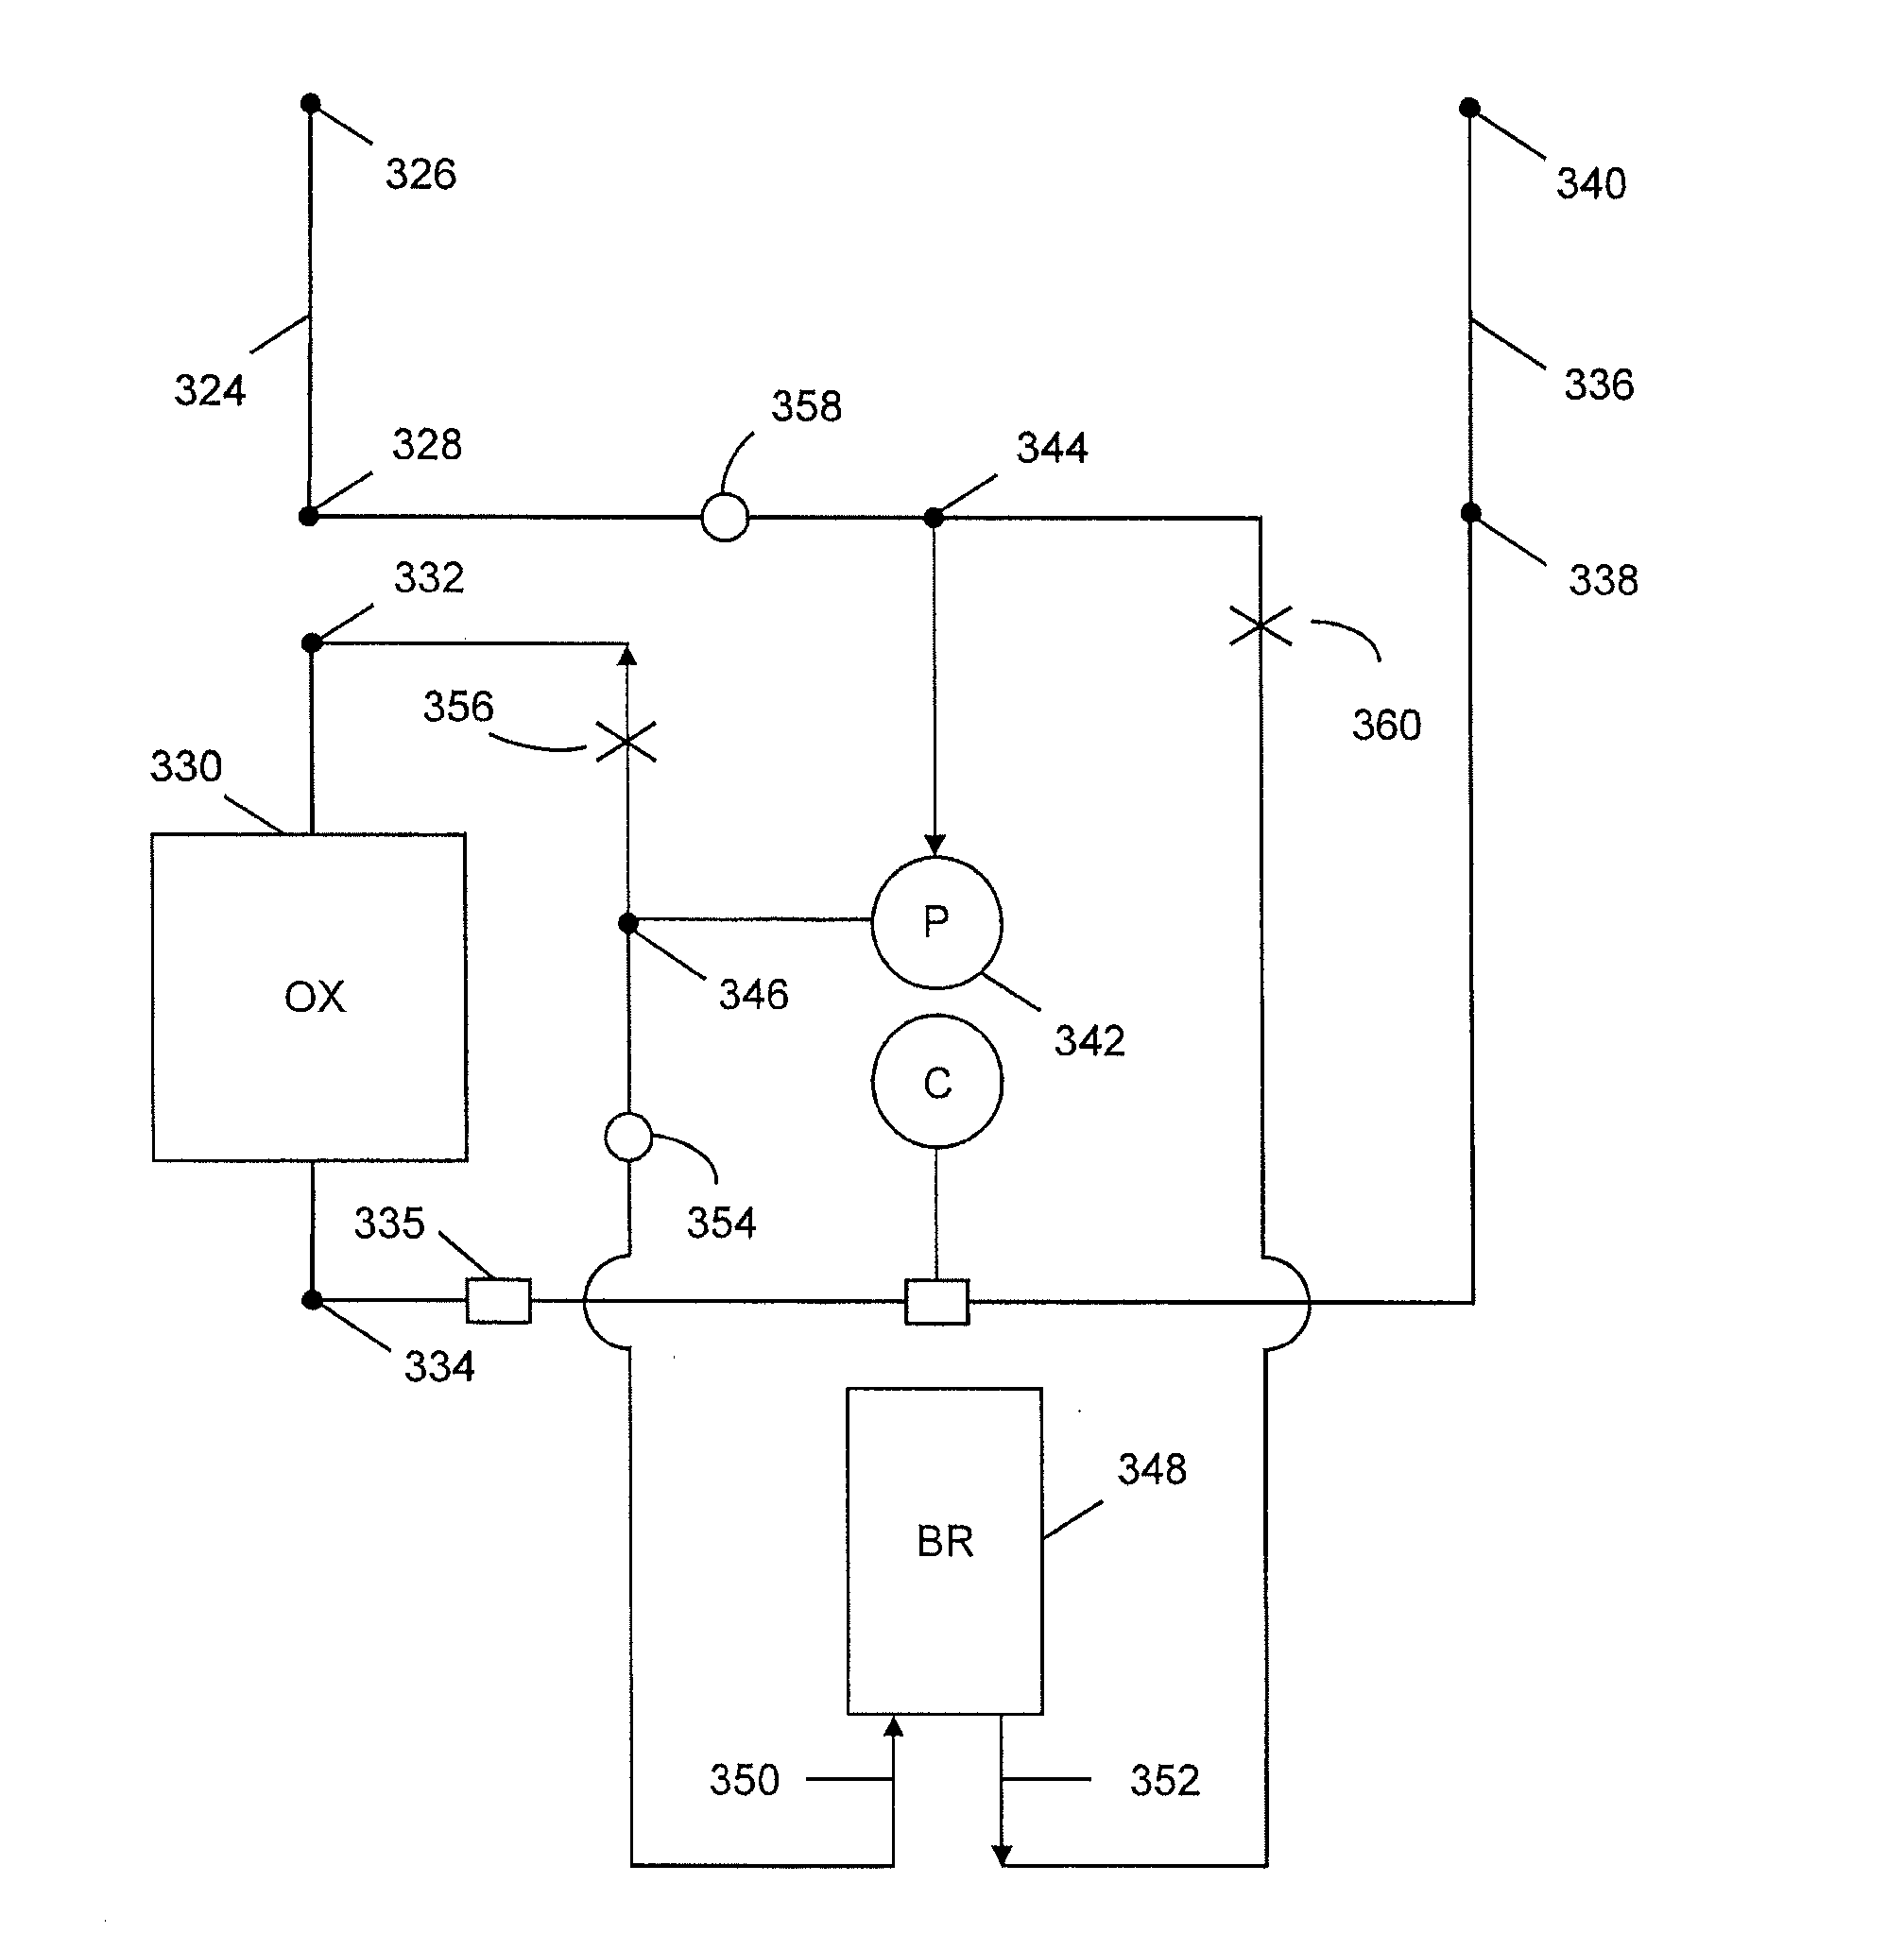 Method Of Controlling Blood Reservoir Volume And Flow In An Extracorporeal Blood Circulation System